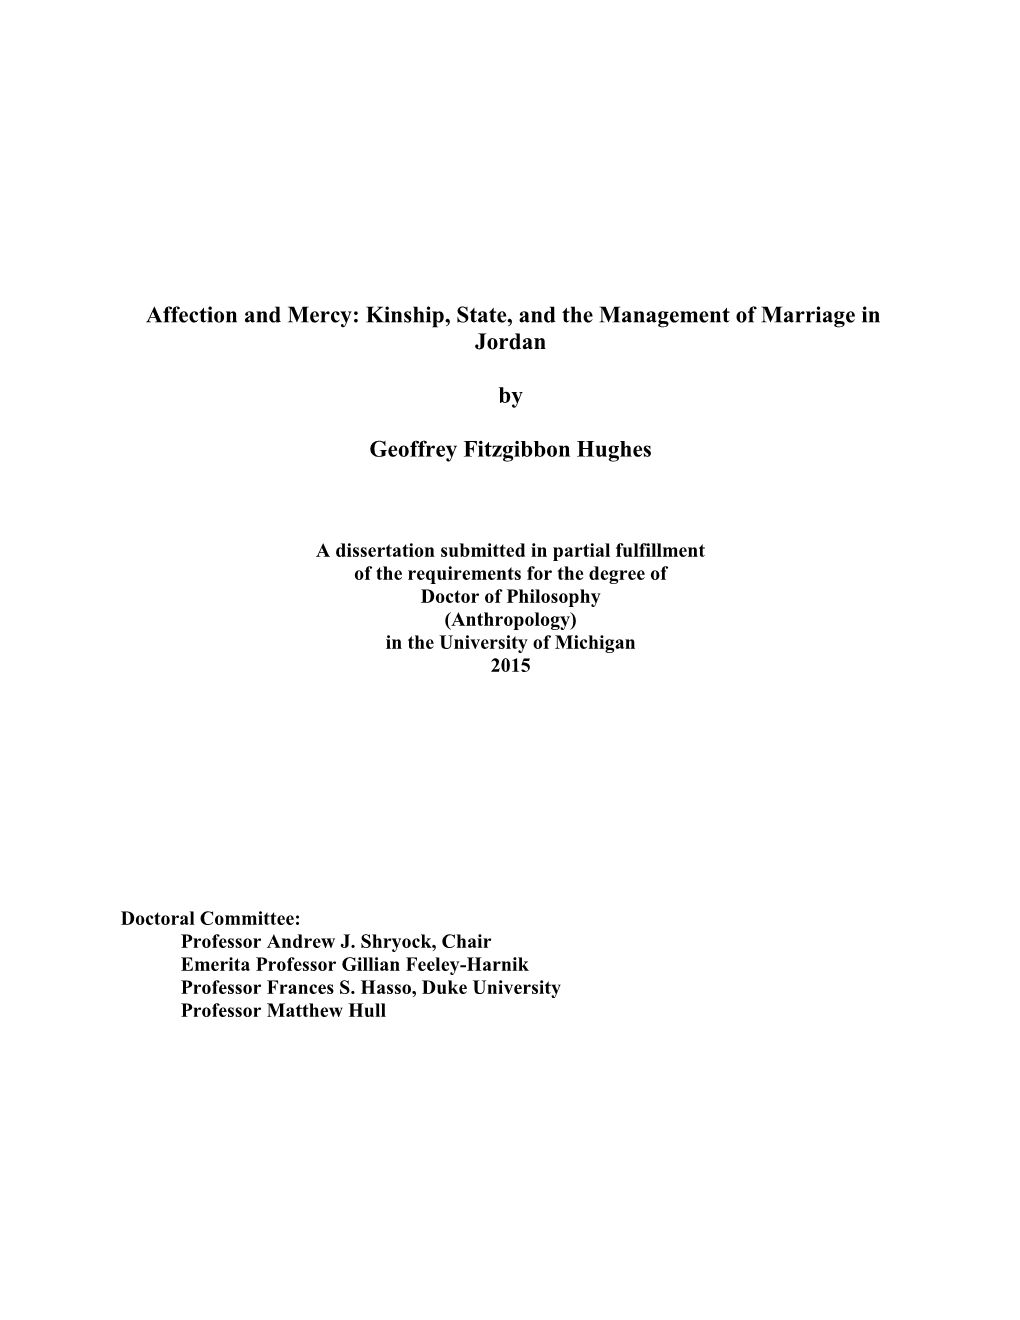 Affection and Mercy: Kinship, State, and the Management of Marriage in Jordan by Geoffrey Fitzgibbon Hughes